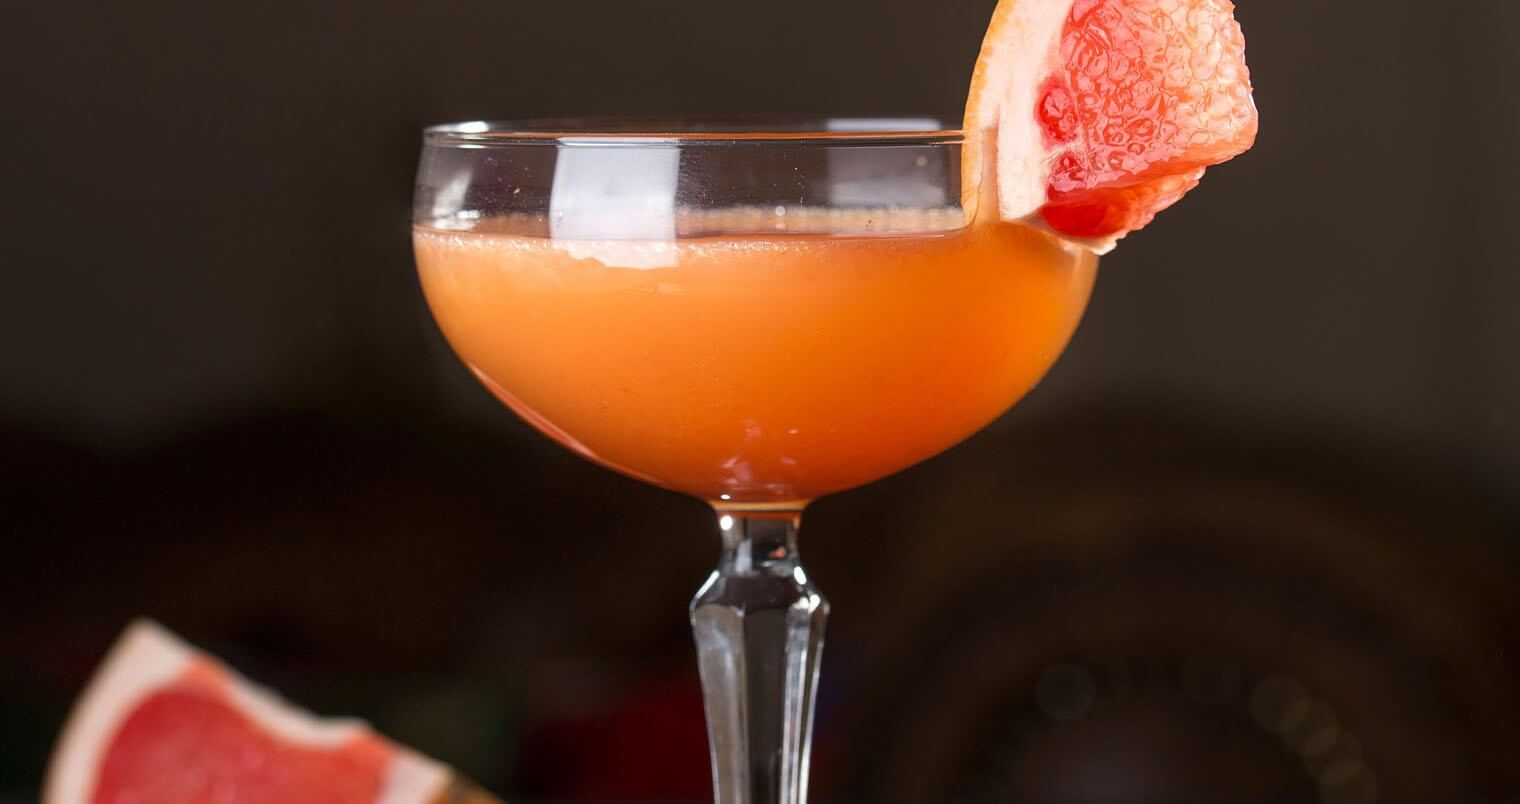 The Bittersweet cocktail with grapefruit garnish, featured image